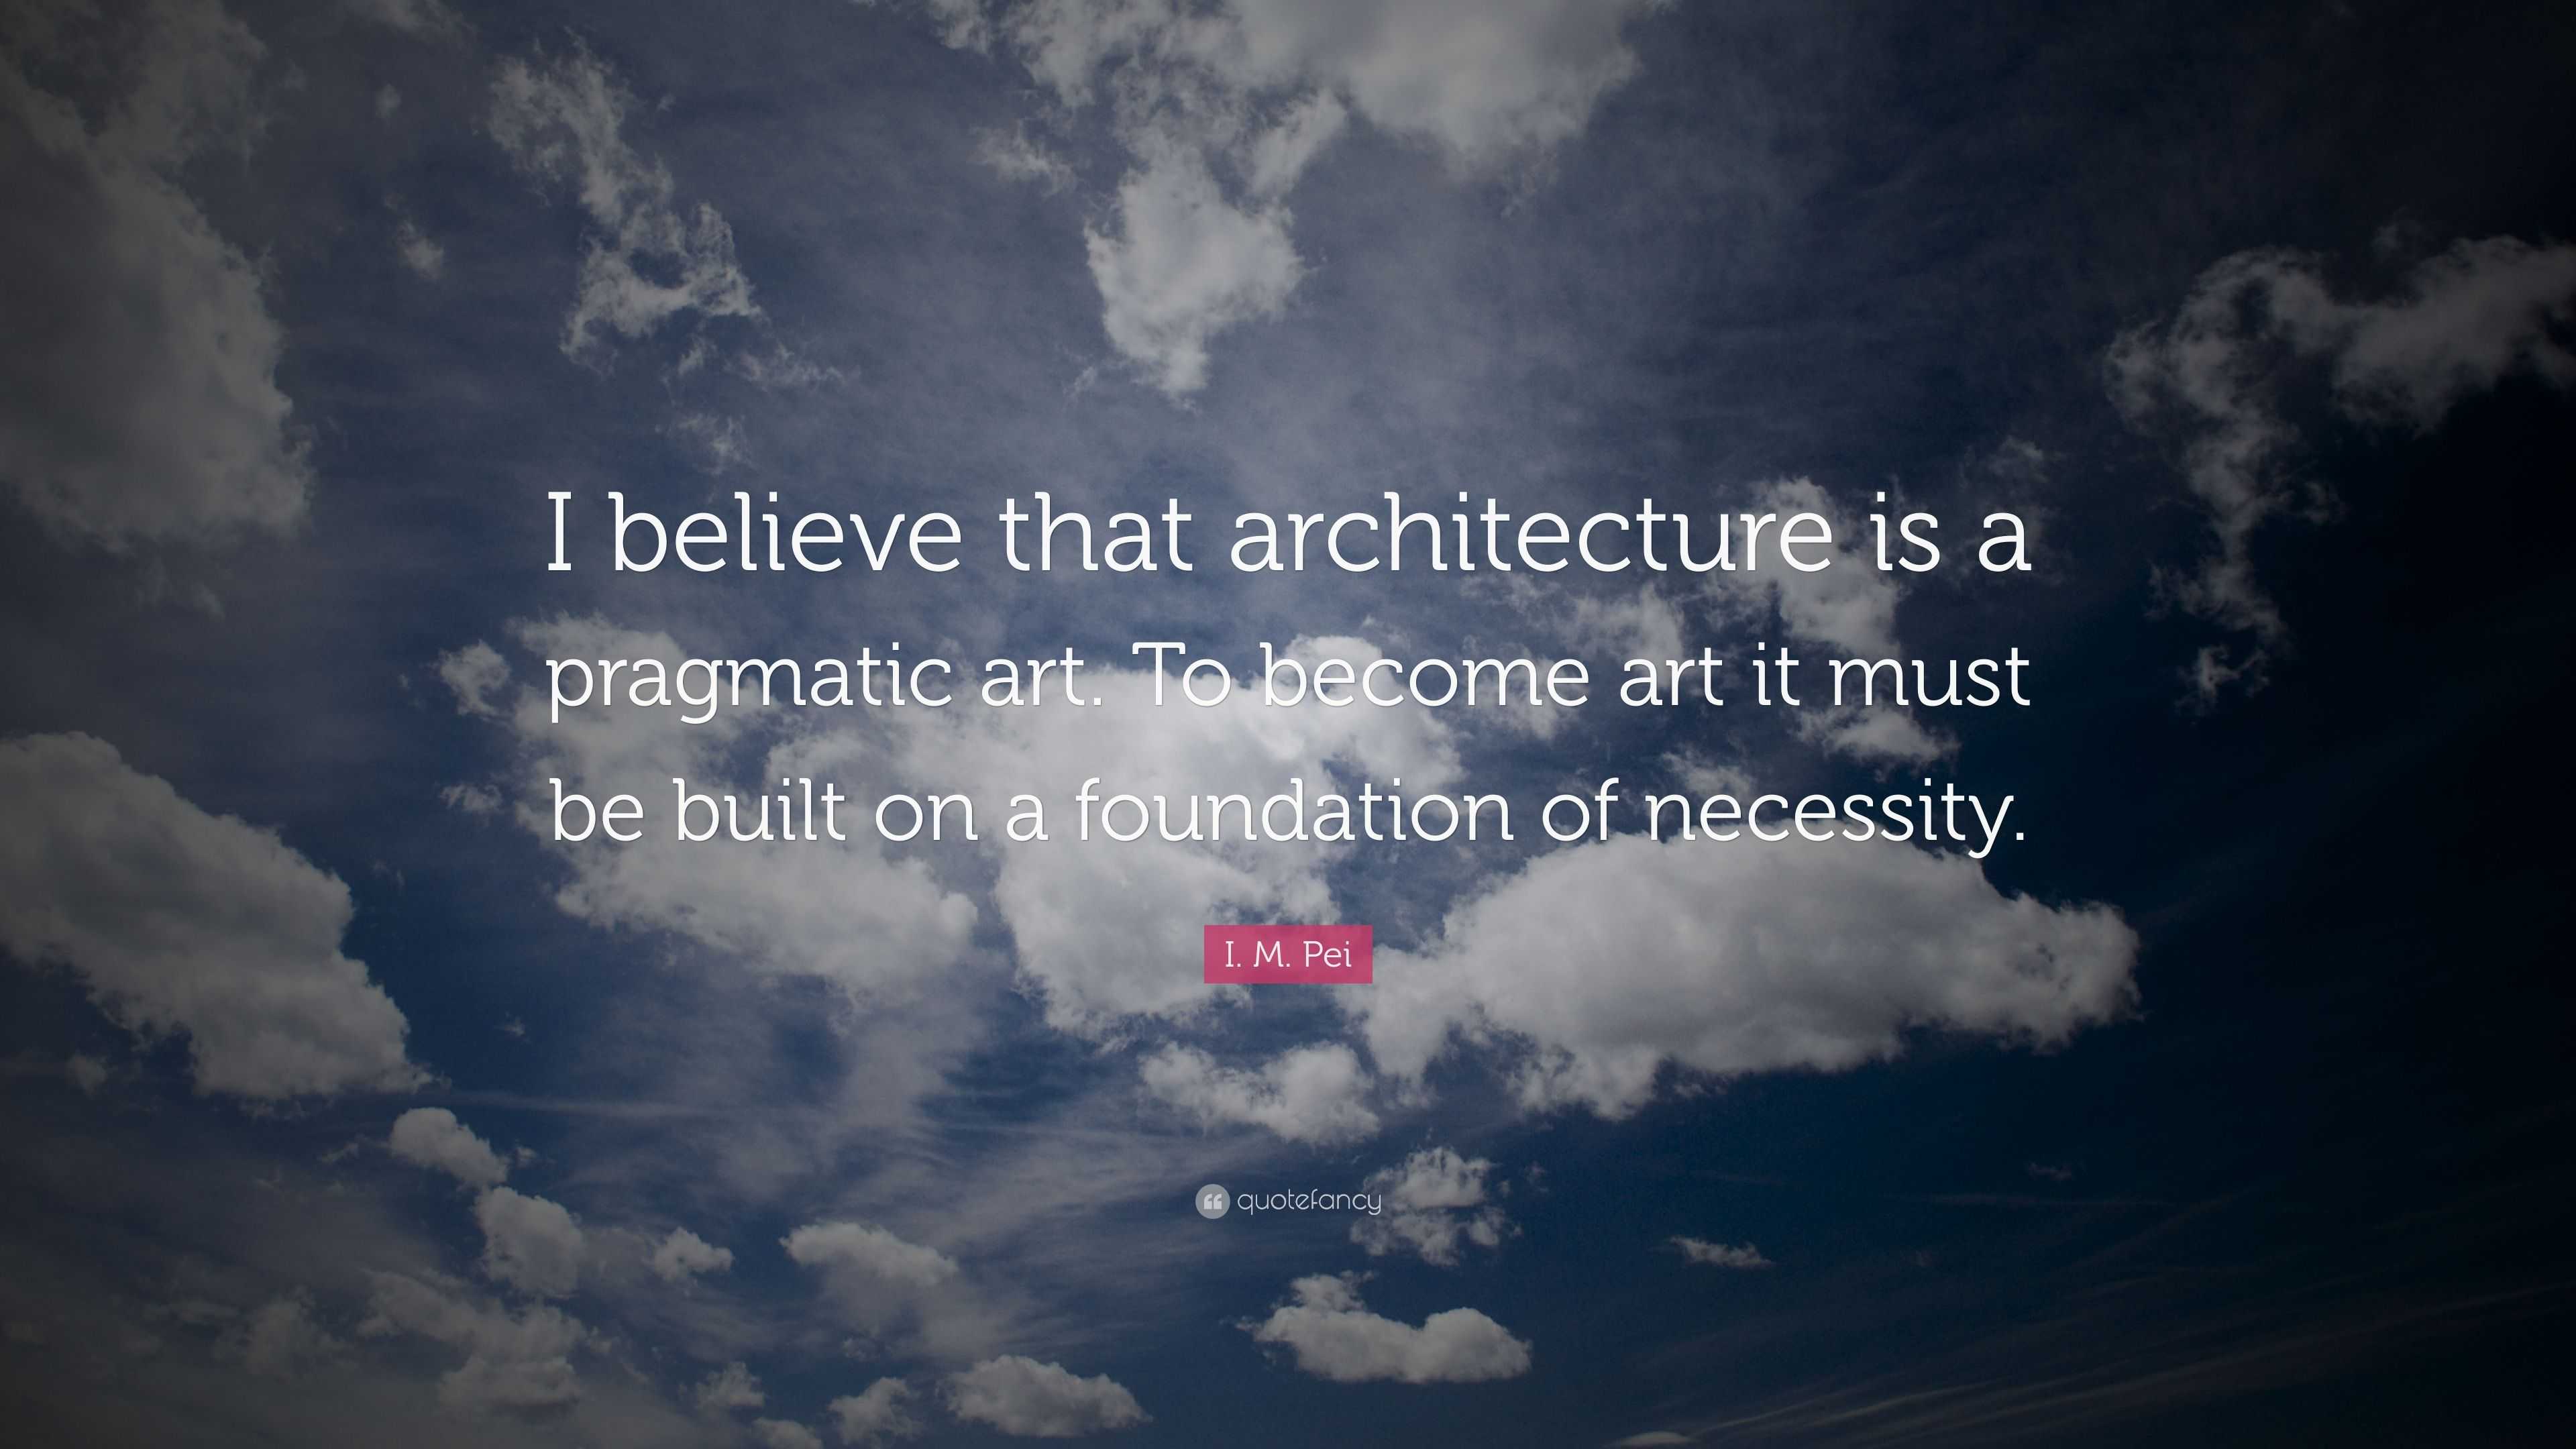 I M Pei Quote “i Believe That Architecture Is A Pragmatic Art To